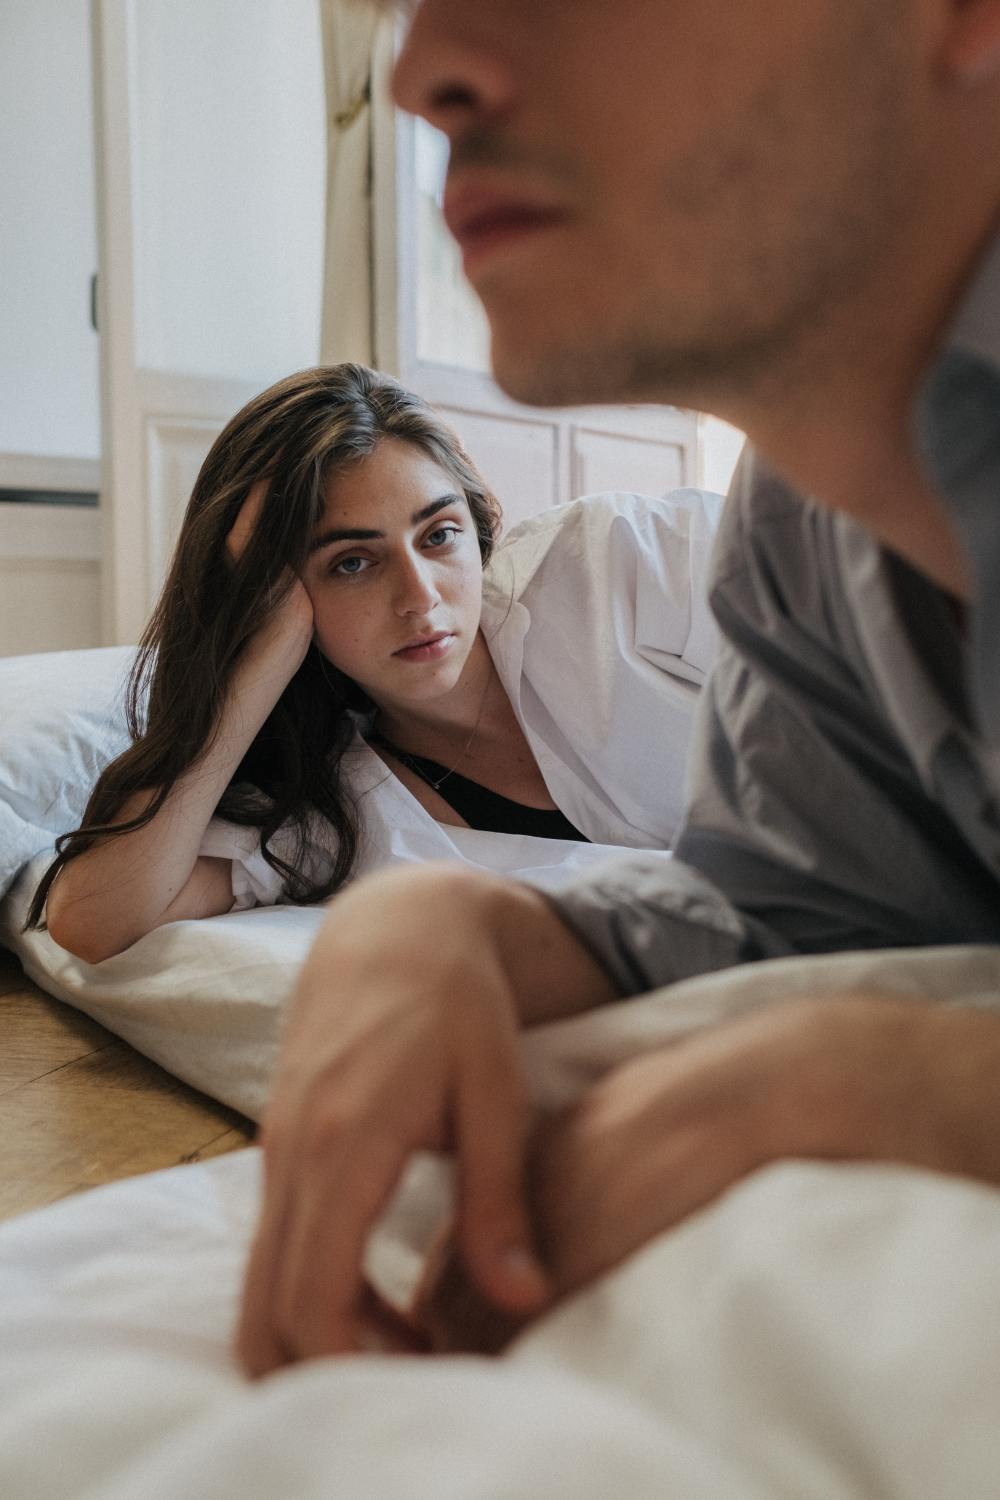 5 Early Signs That He's Ghosting You, And How To Deal With Them